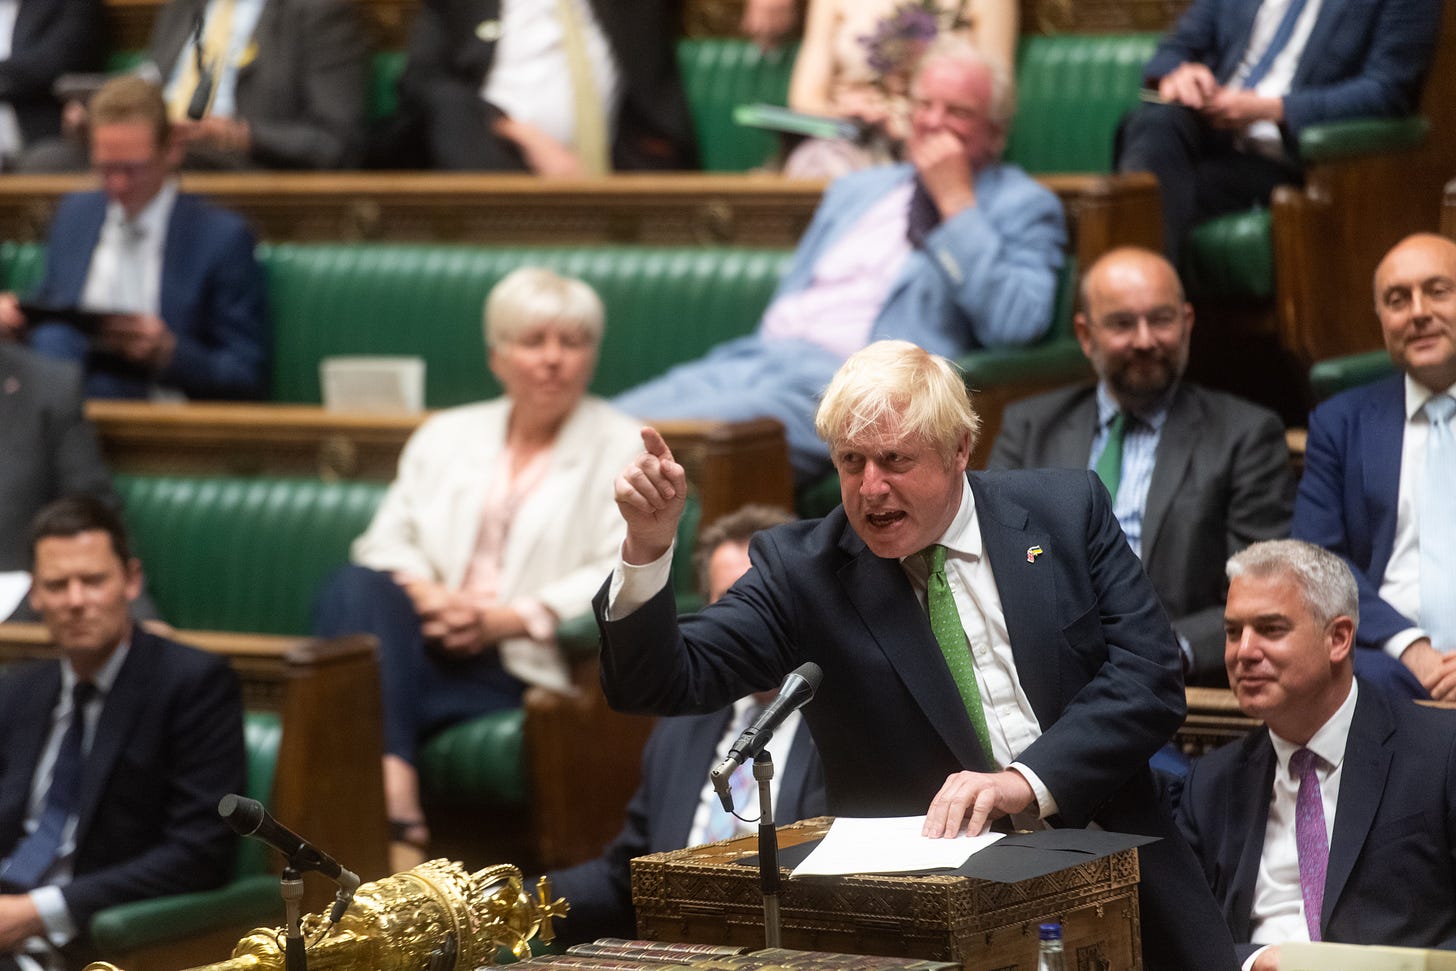 Boris Johnson wins late night confidence vote after bruising Commons debate  | The Independent